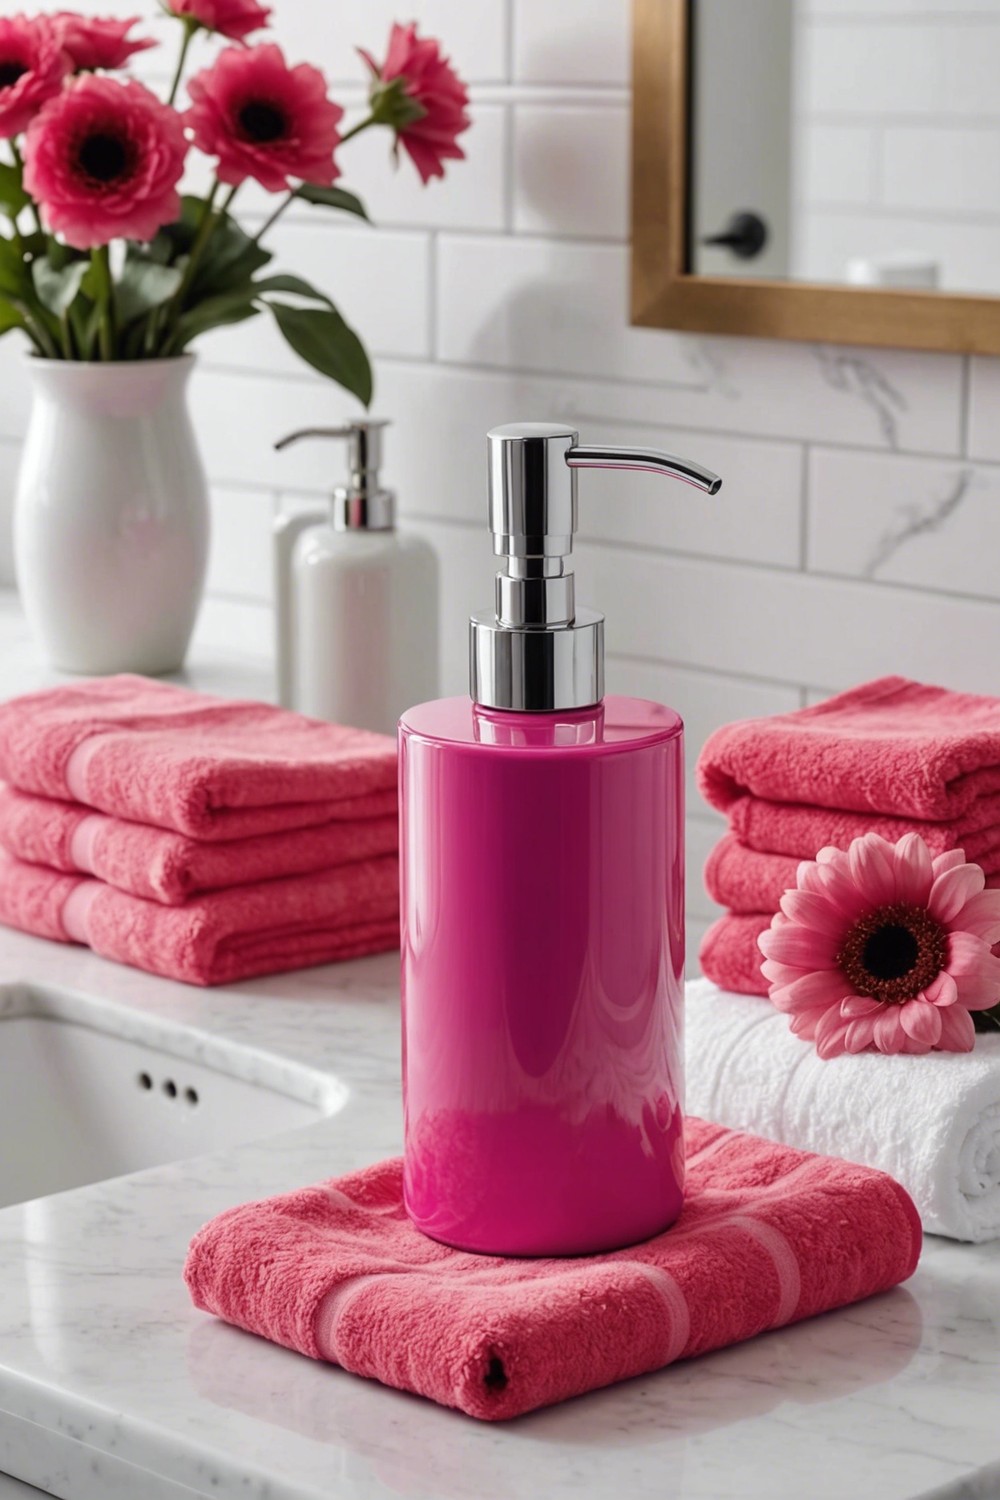 Pinkalicious: Hot Pink Bathroom Accessories